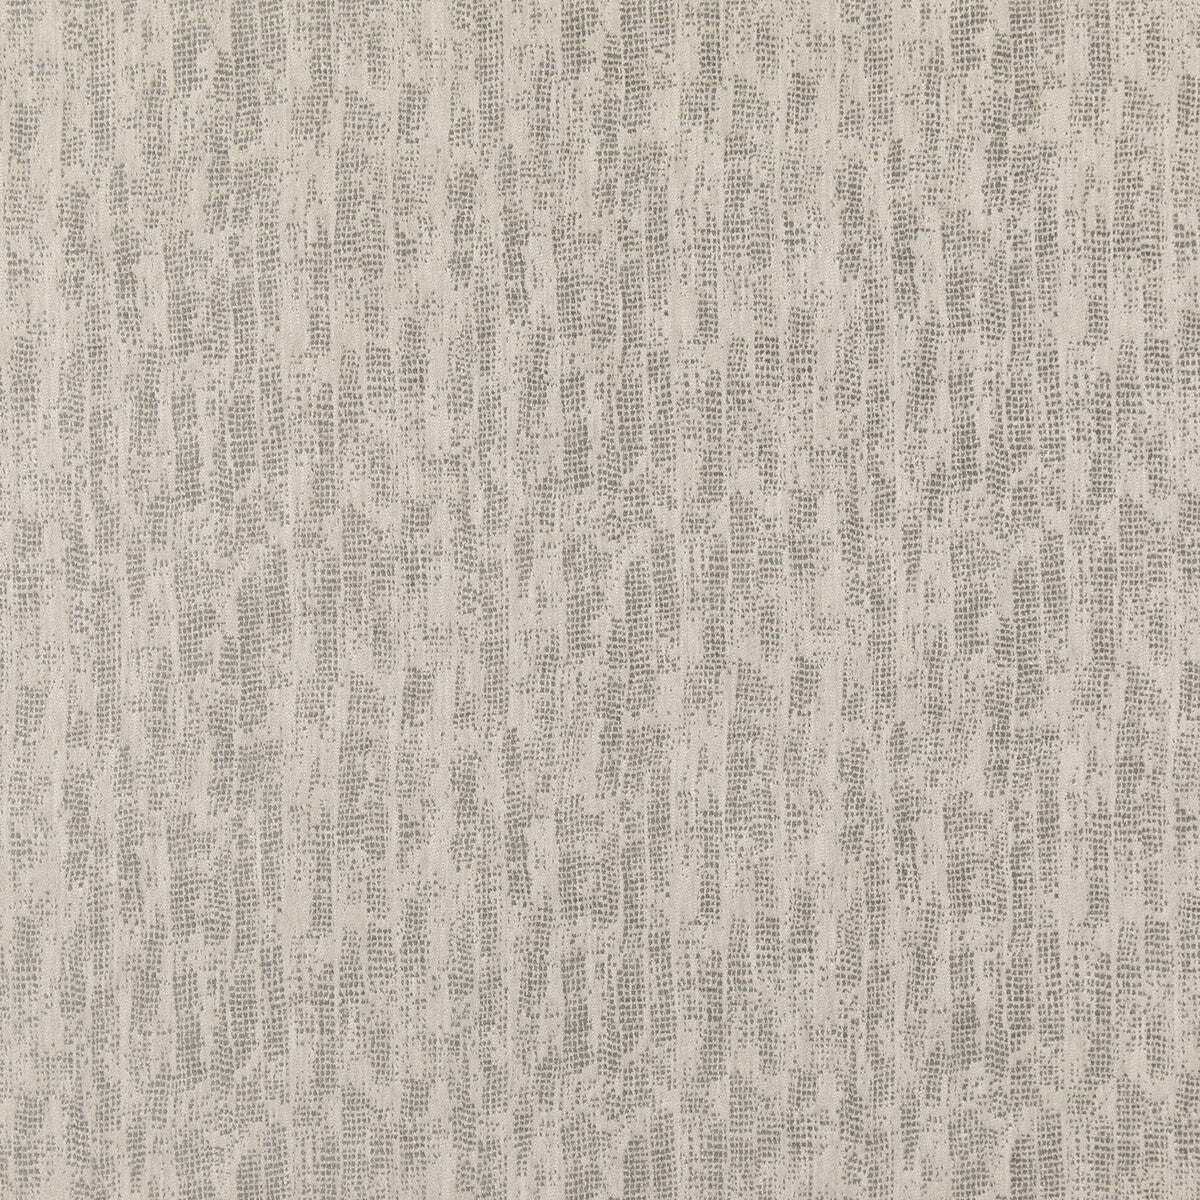 Verse fabric in salt/pepper color - pattern GWF-3735.11.0 - by Lee Jofa Modern in the Kelly Wearstler IV collection